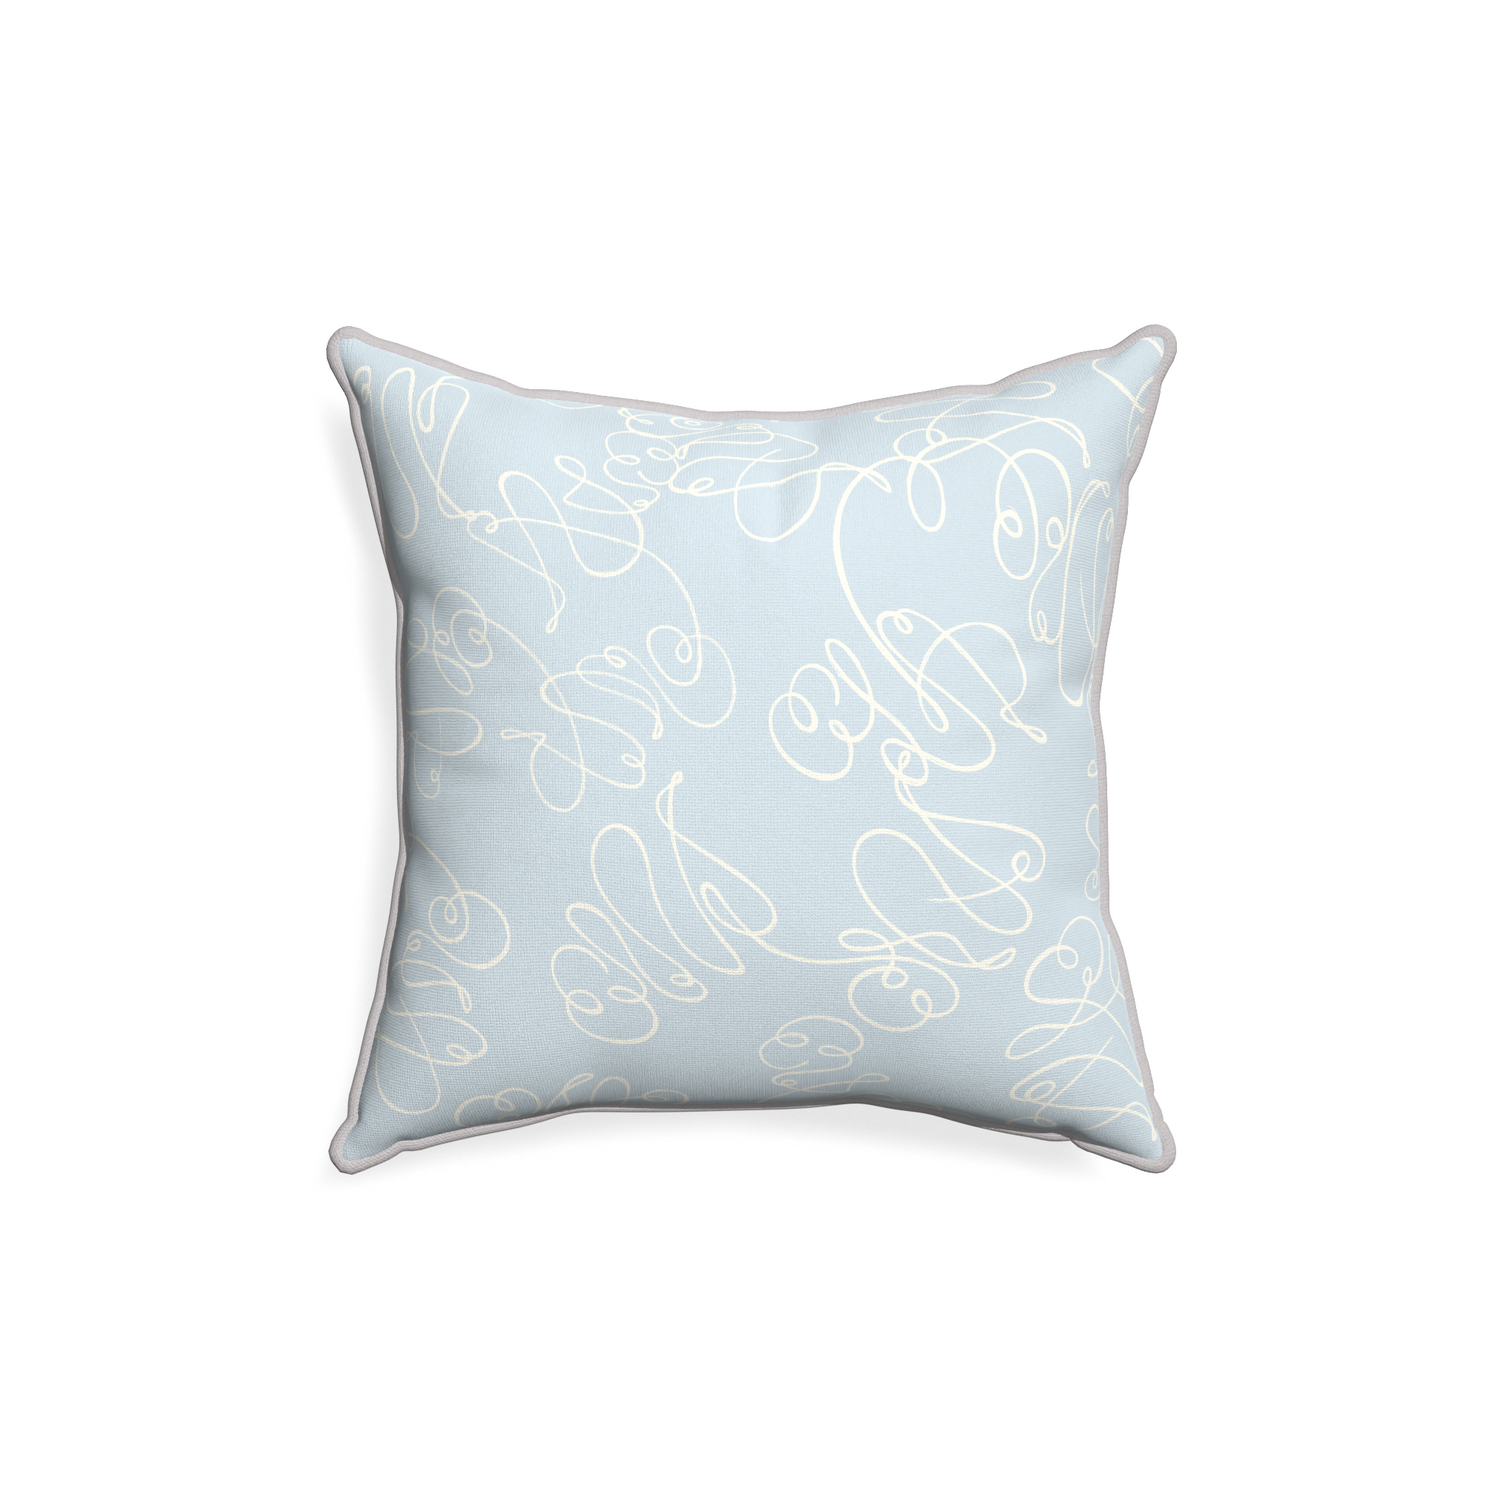 18-square mirabella custom powder blue abstractpillow with pebble piping on white background